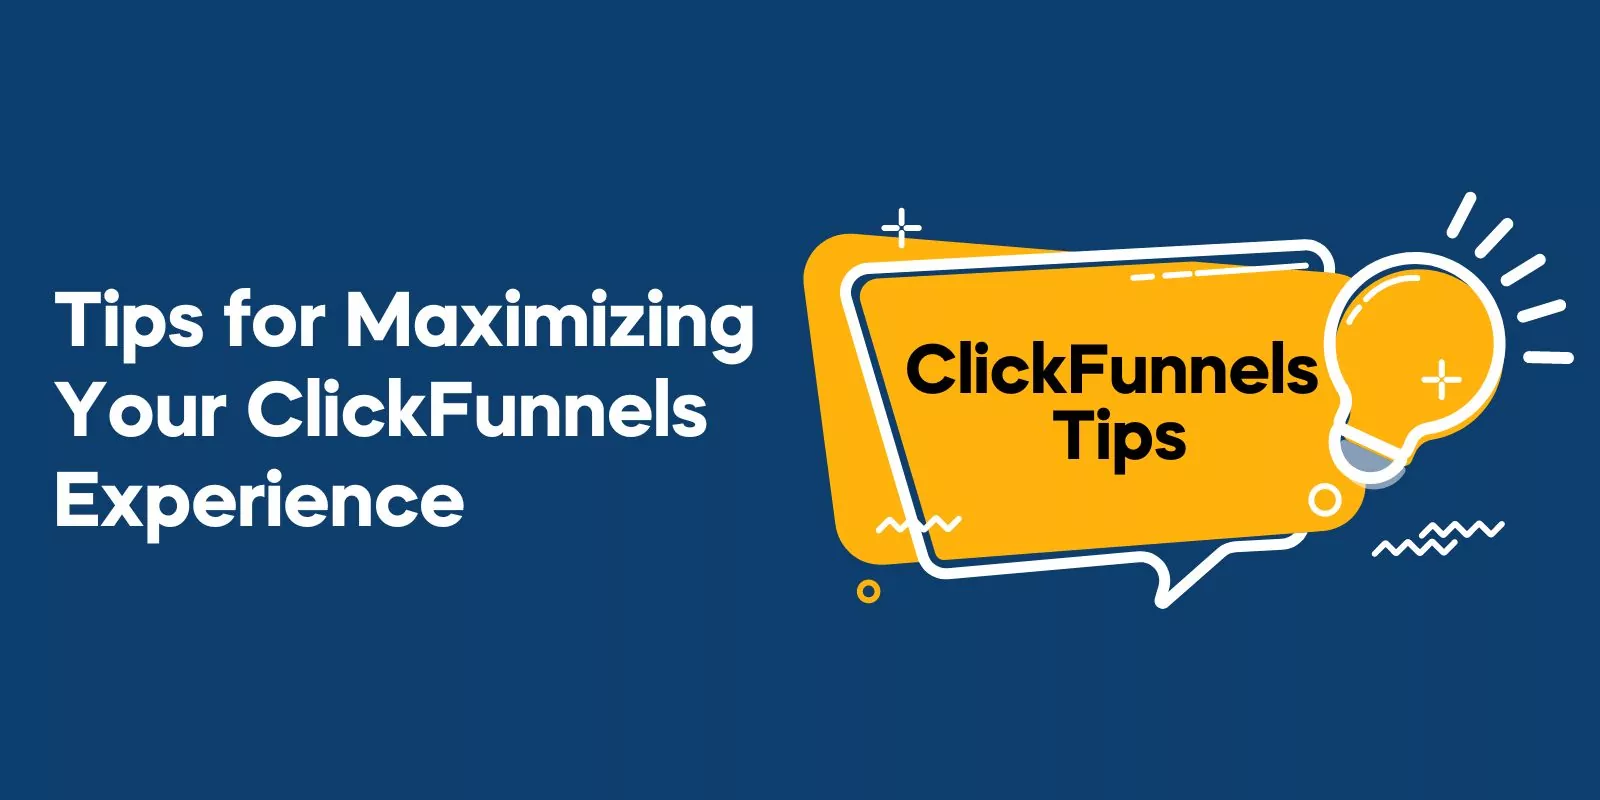 Tips for Maximizing Your ClickFunnels Experience